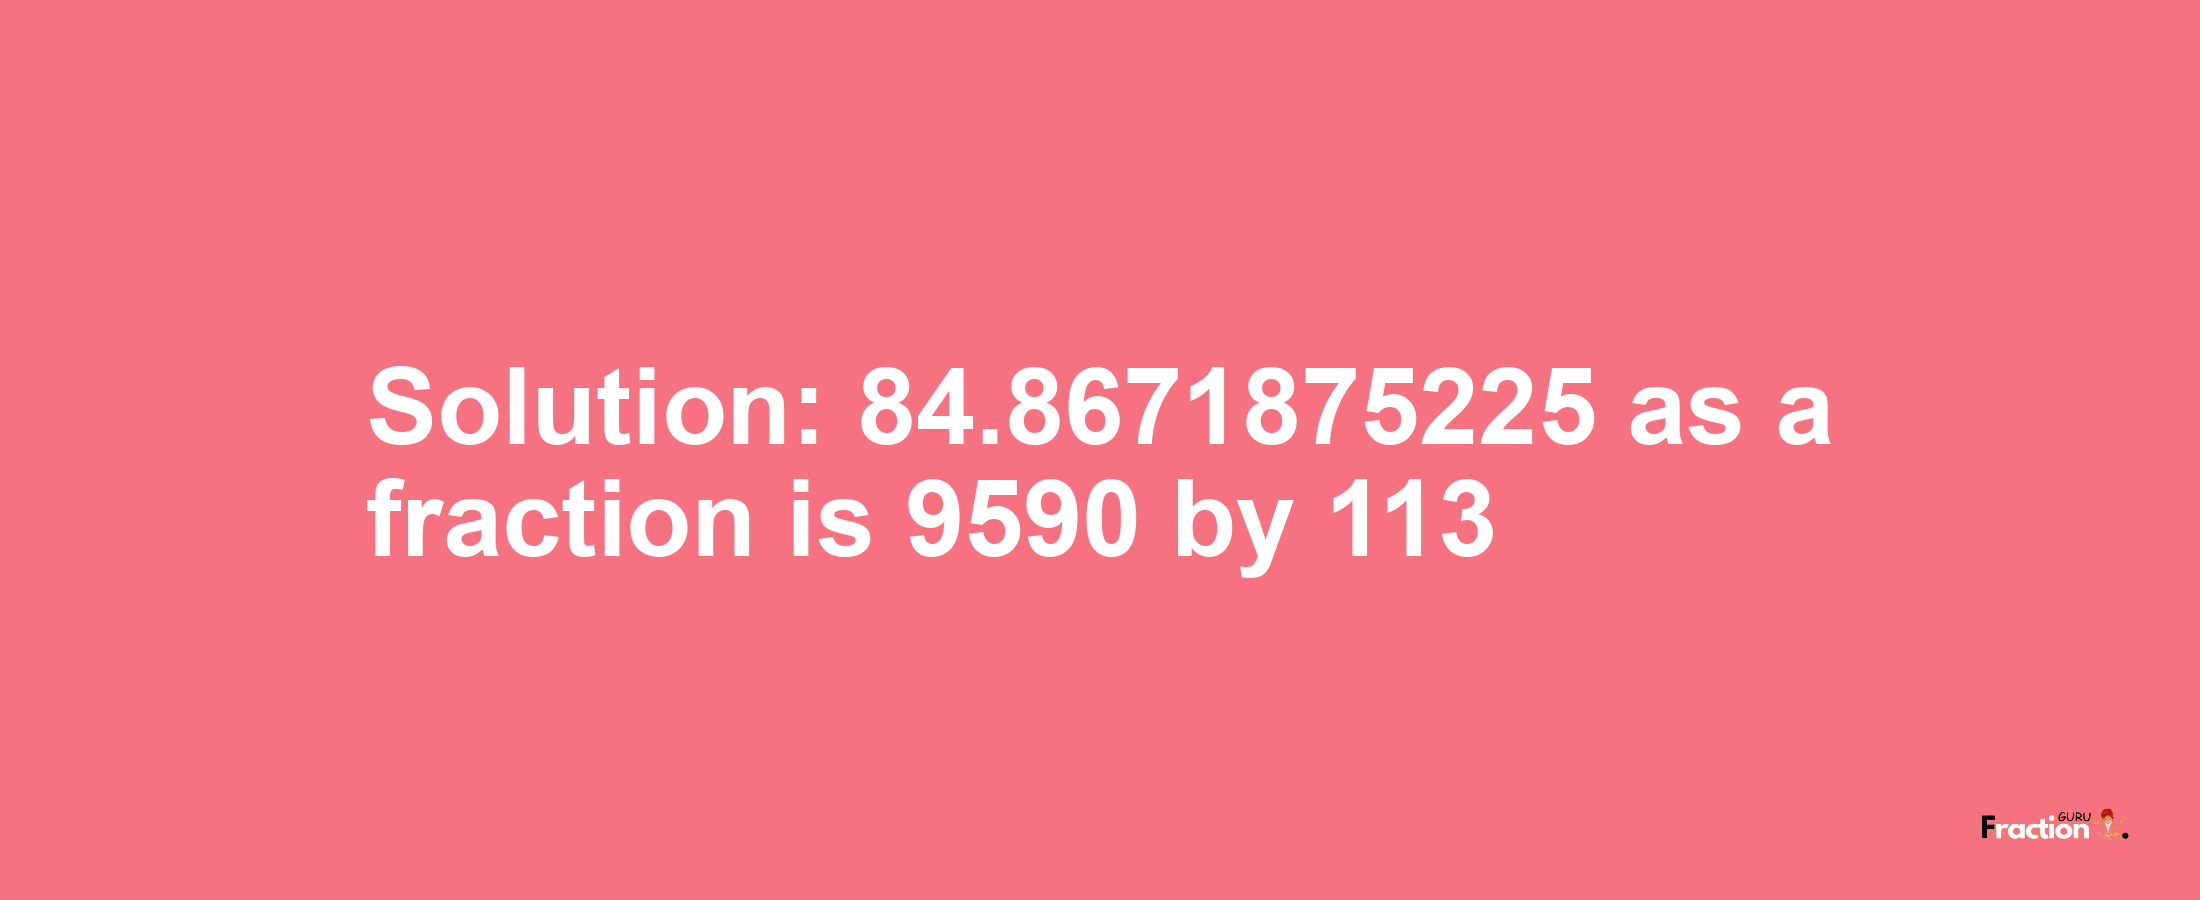 Solution:84.8671875225 as a fraction is 9590/113